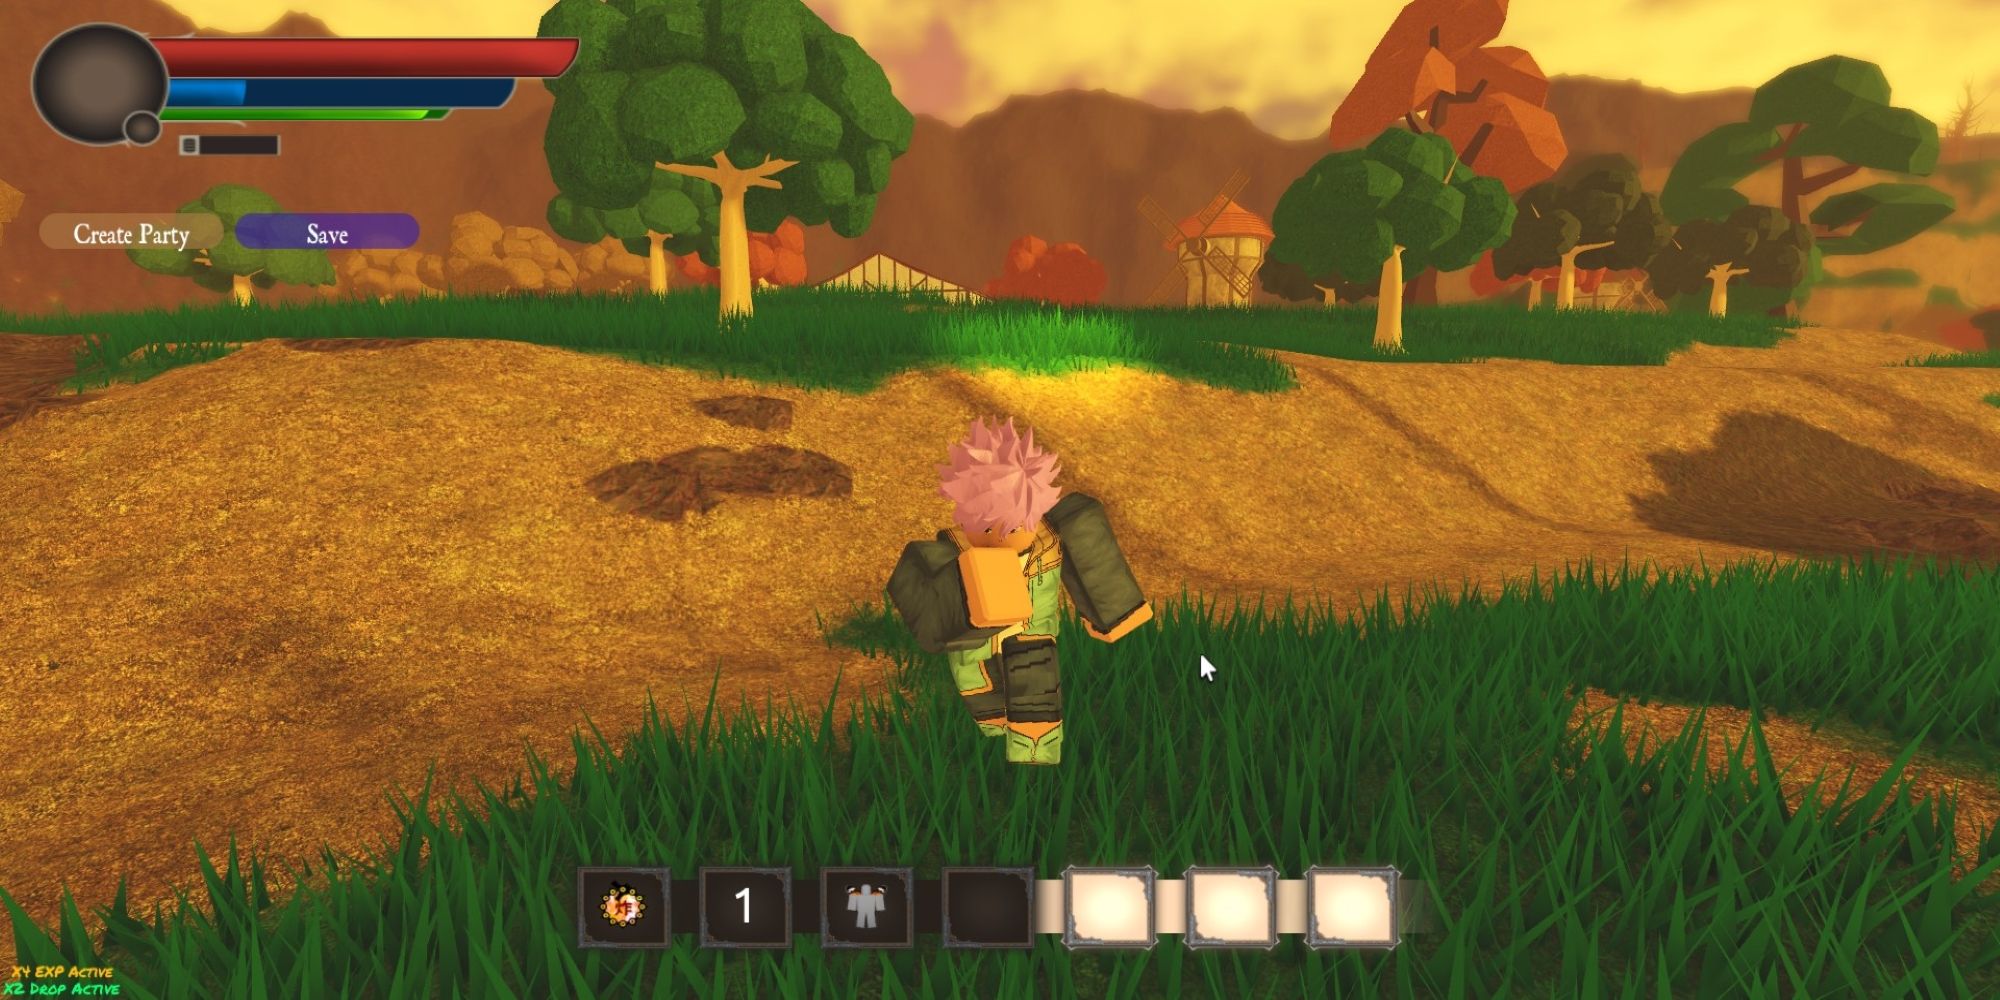 A pink haired protagonist Nitro Dashes through a field in the Roblox game, Deadly Sins Retribution.